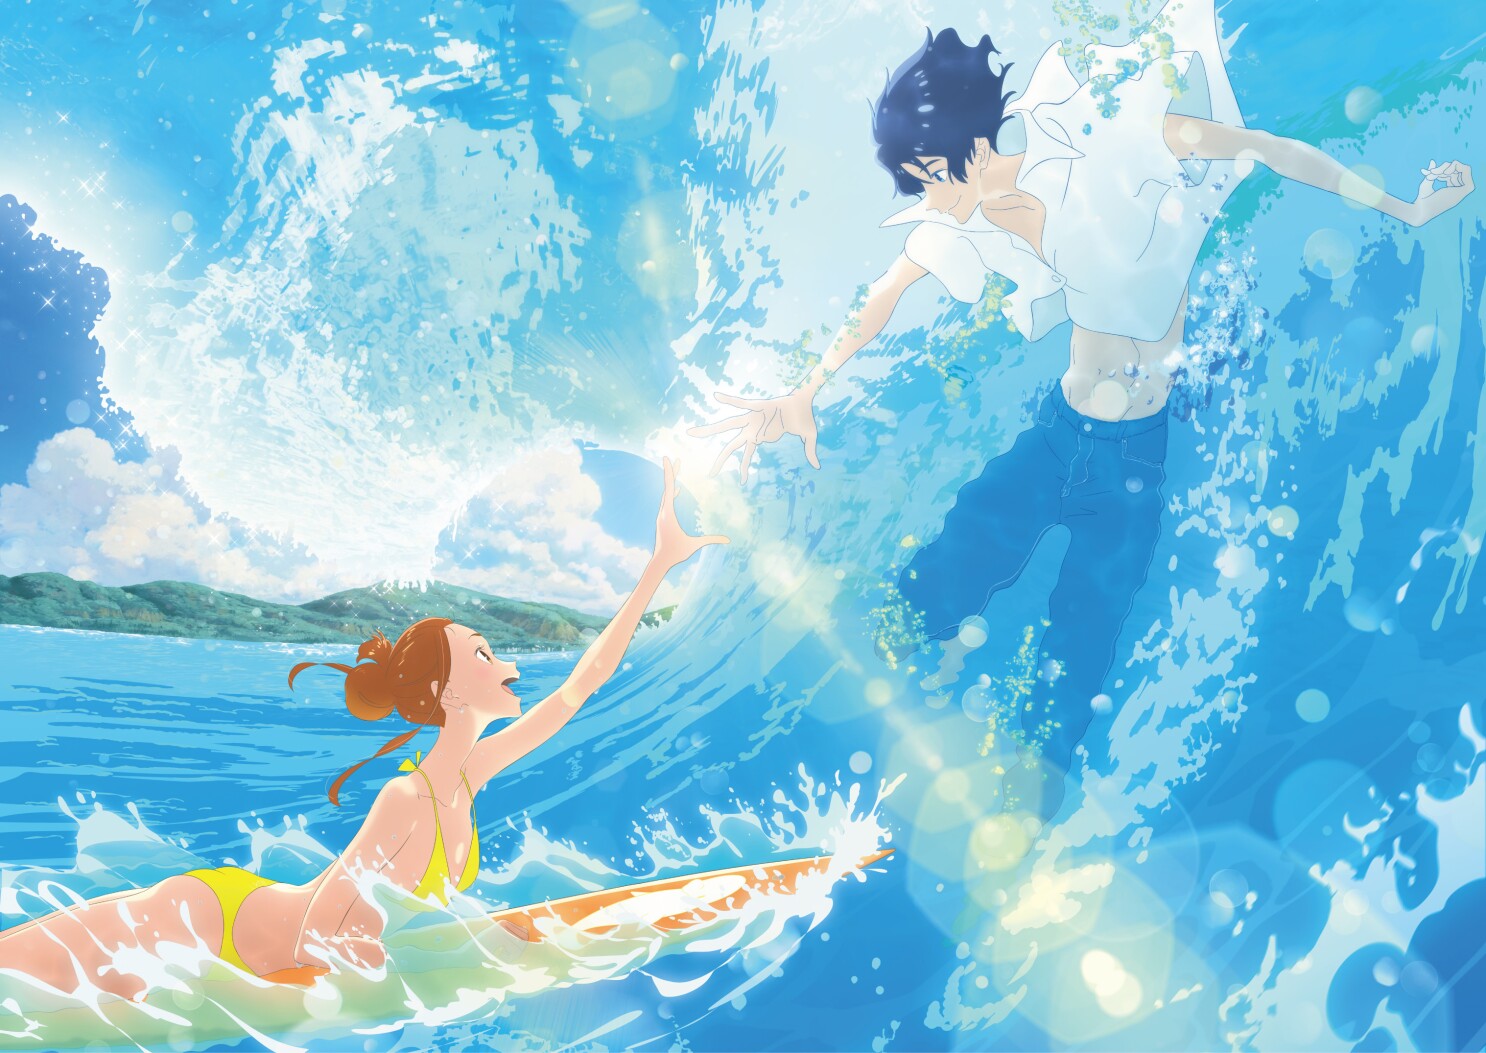 Ride Your Wave Review The Best Masaaki Yuasa Anime Yet Los Angeles Times